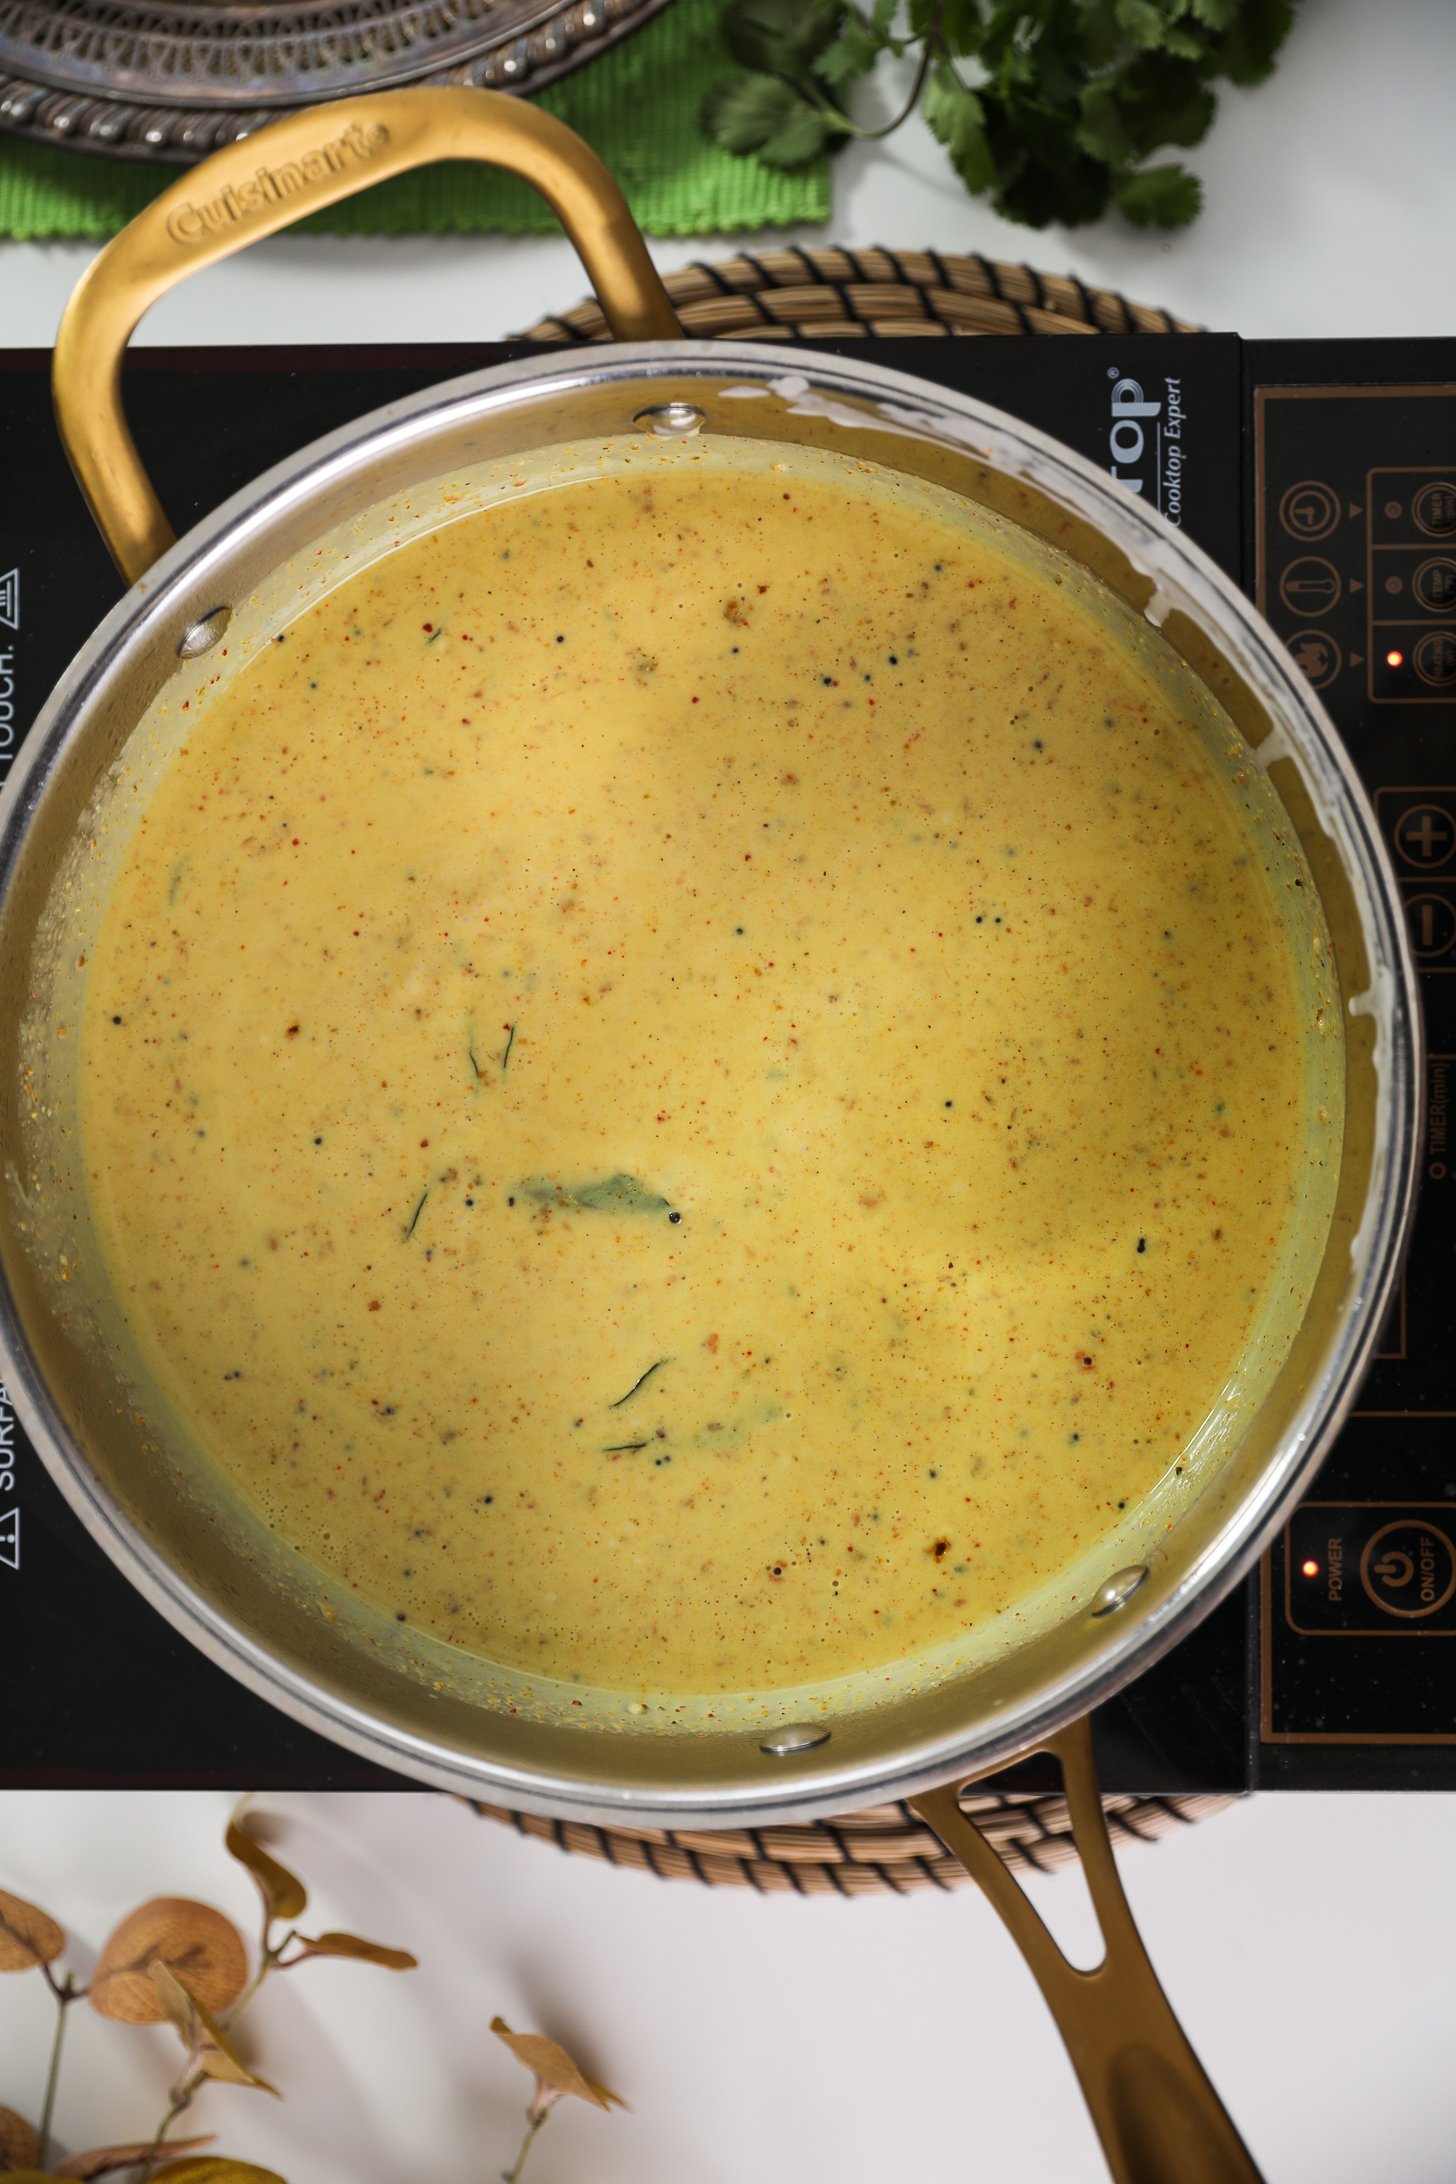 Pan of yellow grainy sauce on a mobile cooktop.